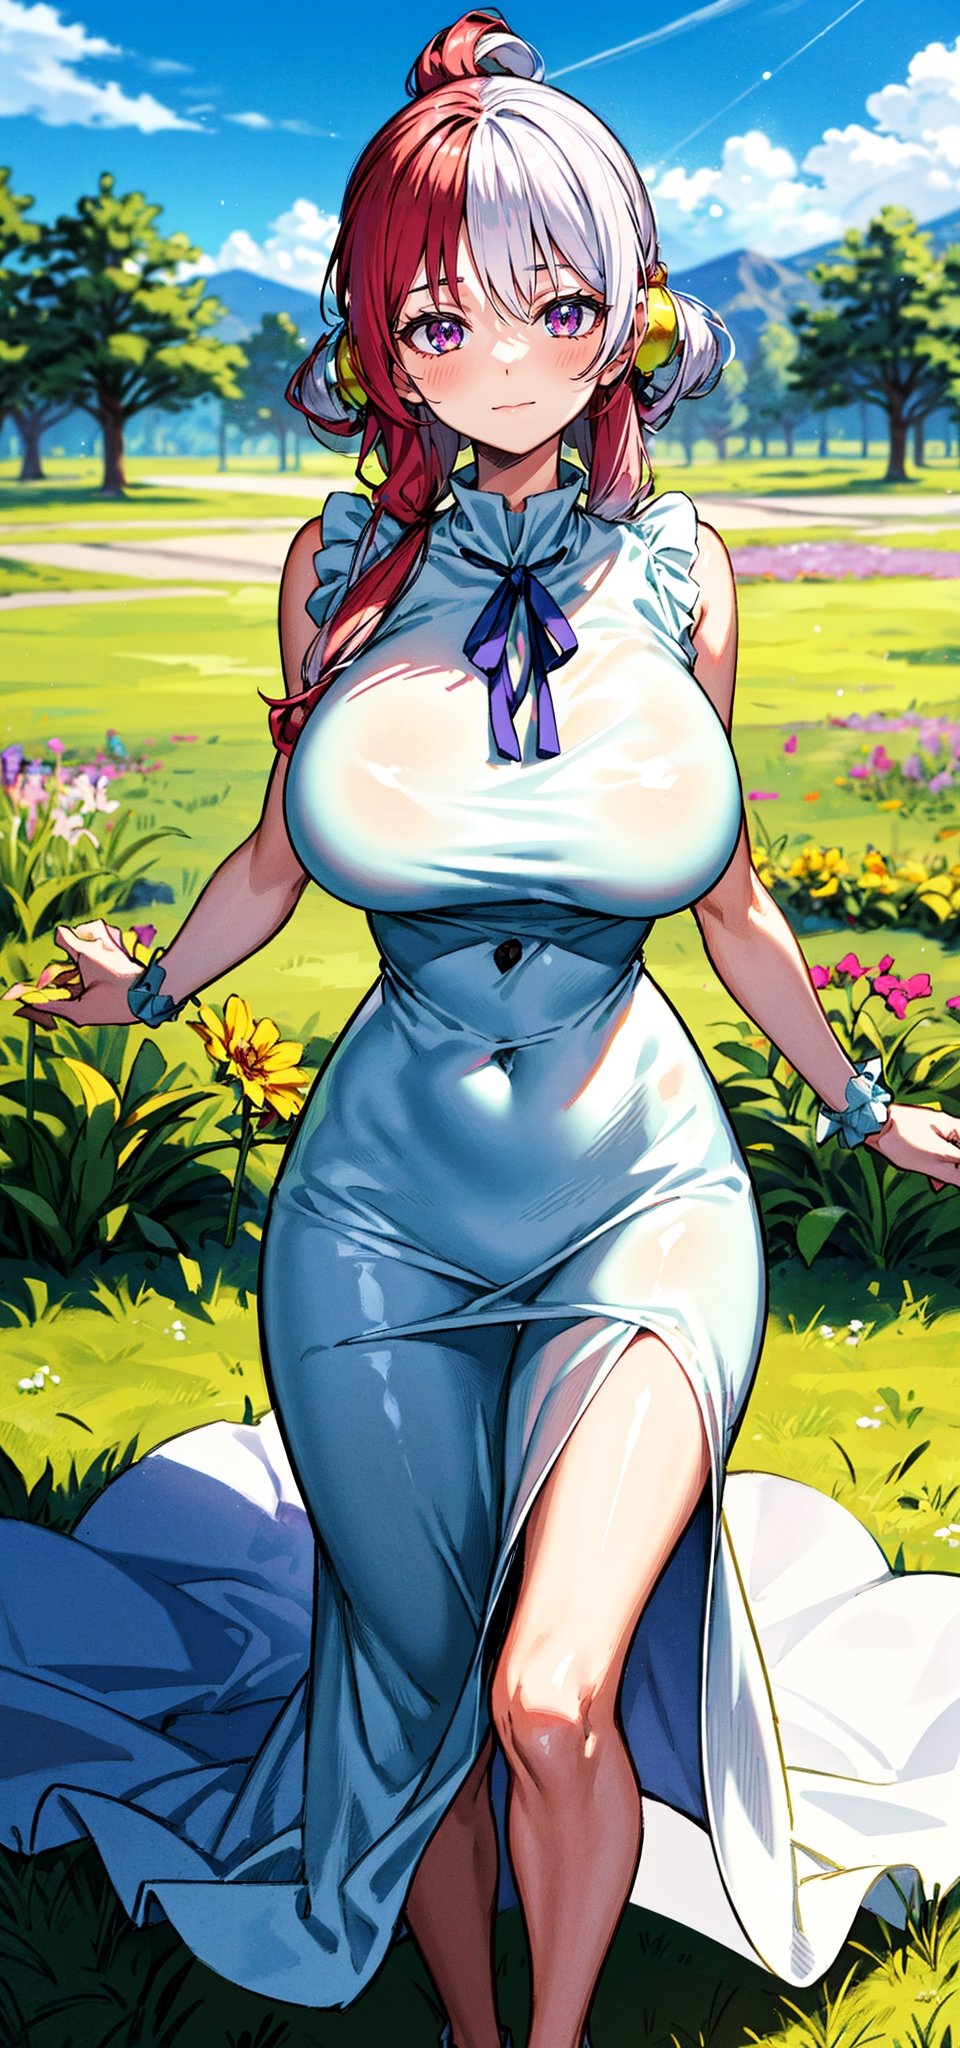 Imagine an ethereal lady in a serene meadow, where the grass and flowers sway gently with the breeze, big_boobs,  Her elegant maxi dress features soft pastel hues that blend harmoniously with the natural surroundings. The artwork captures her radiant and whimsical beauty with ultra HD clarity, accentuating the delicate flower crowns or hairpins in her loosely braided updo.